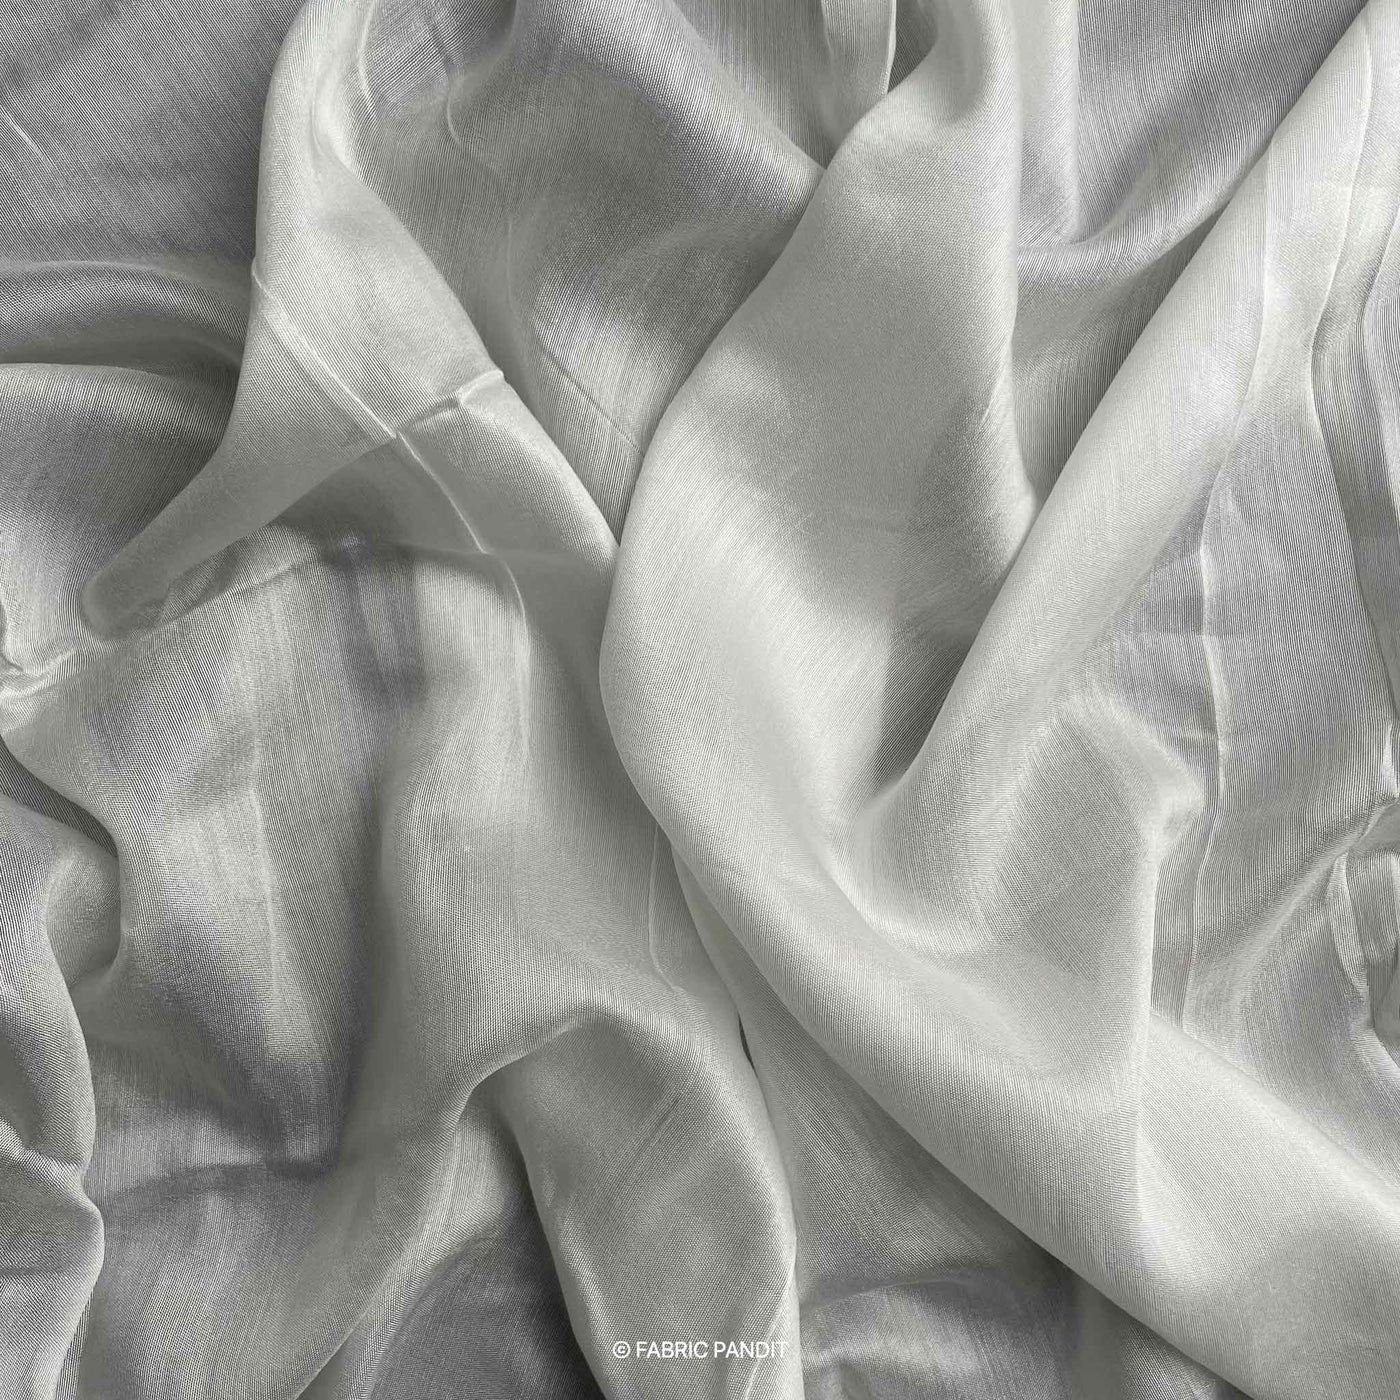 Dyeable Fabric Cut Piece (CUT PIECE) White Dyeable Pure Bemberg Fine Muslin Silk Plain Fabric (Width 44 inches)